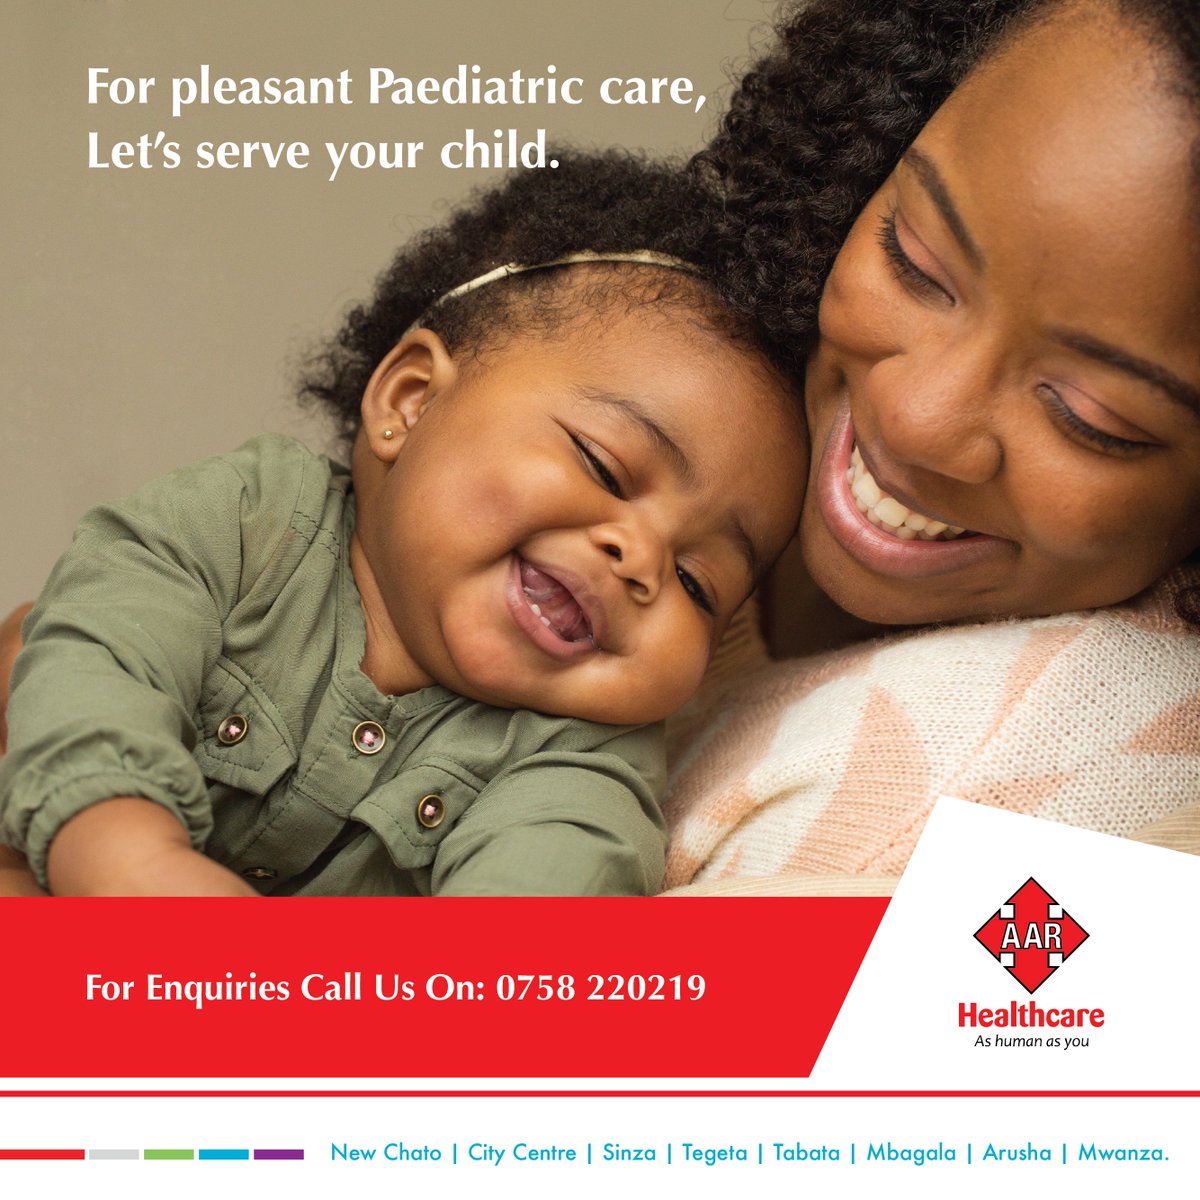 Our Polyclinics are open now in Dar es Salaam, Arusha, and Mwanza. Come and meet a Paediatrician for your child today, we’re here for you. 
________
#AARHealthcare #KaaribuTukuhudumie #AAR #Doctor #Daktari #Ultrasound #Dental #Pediatrician  #Health #Medical #Monday #Tanzania